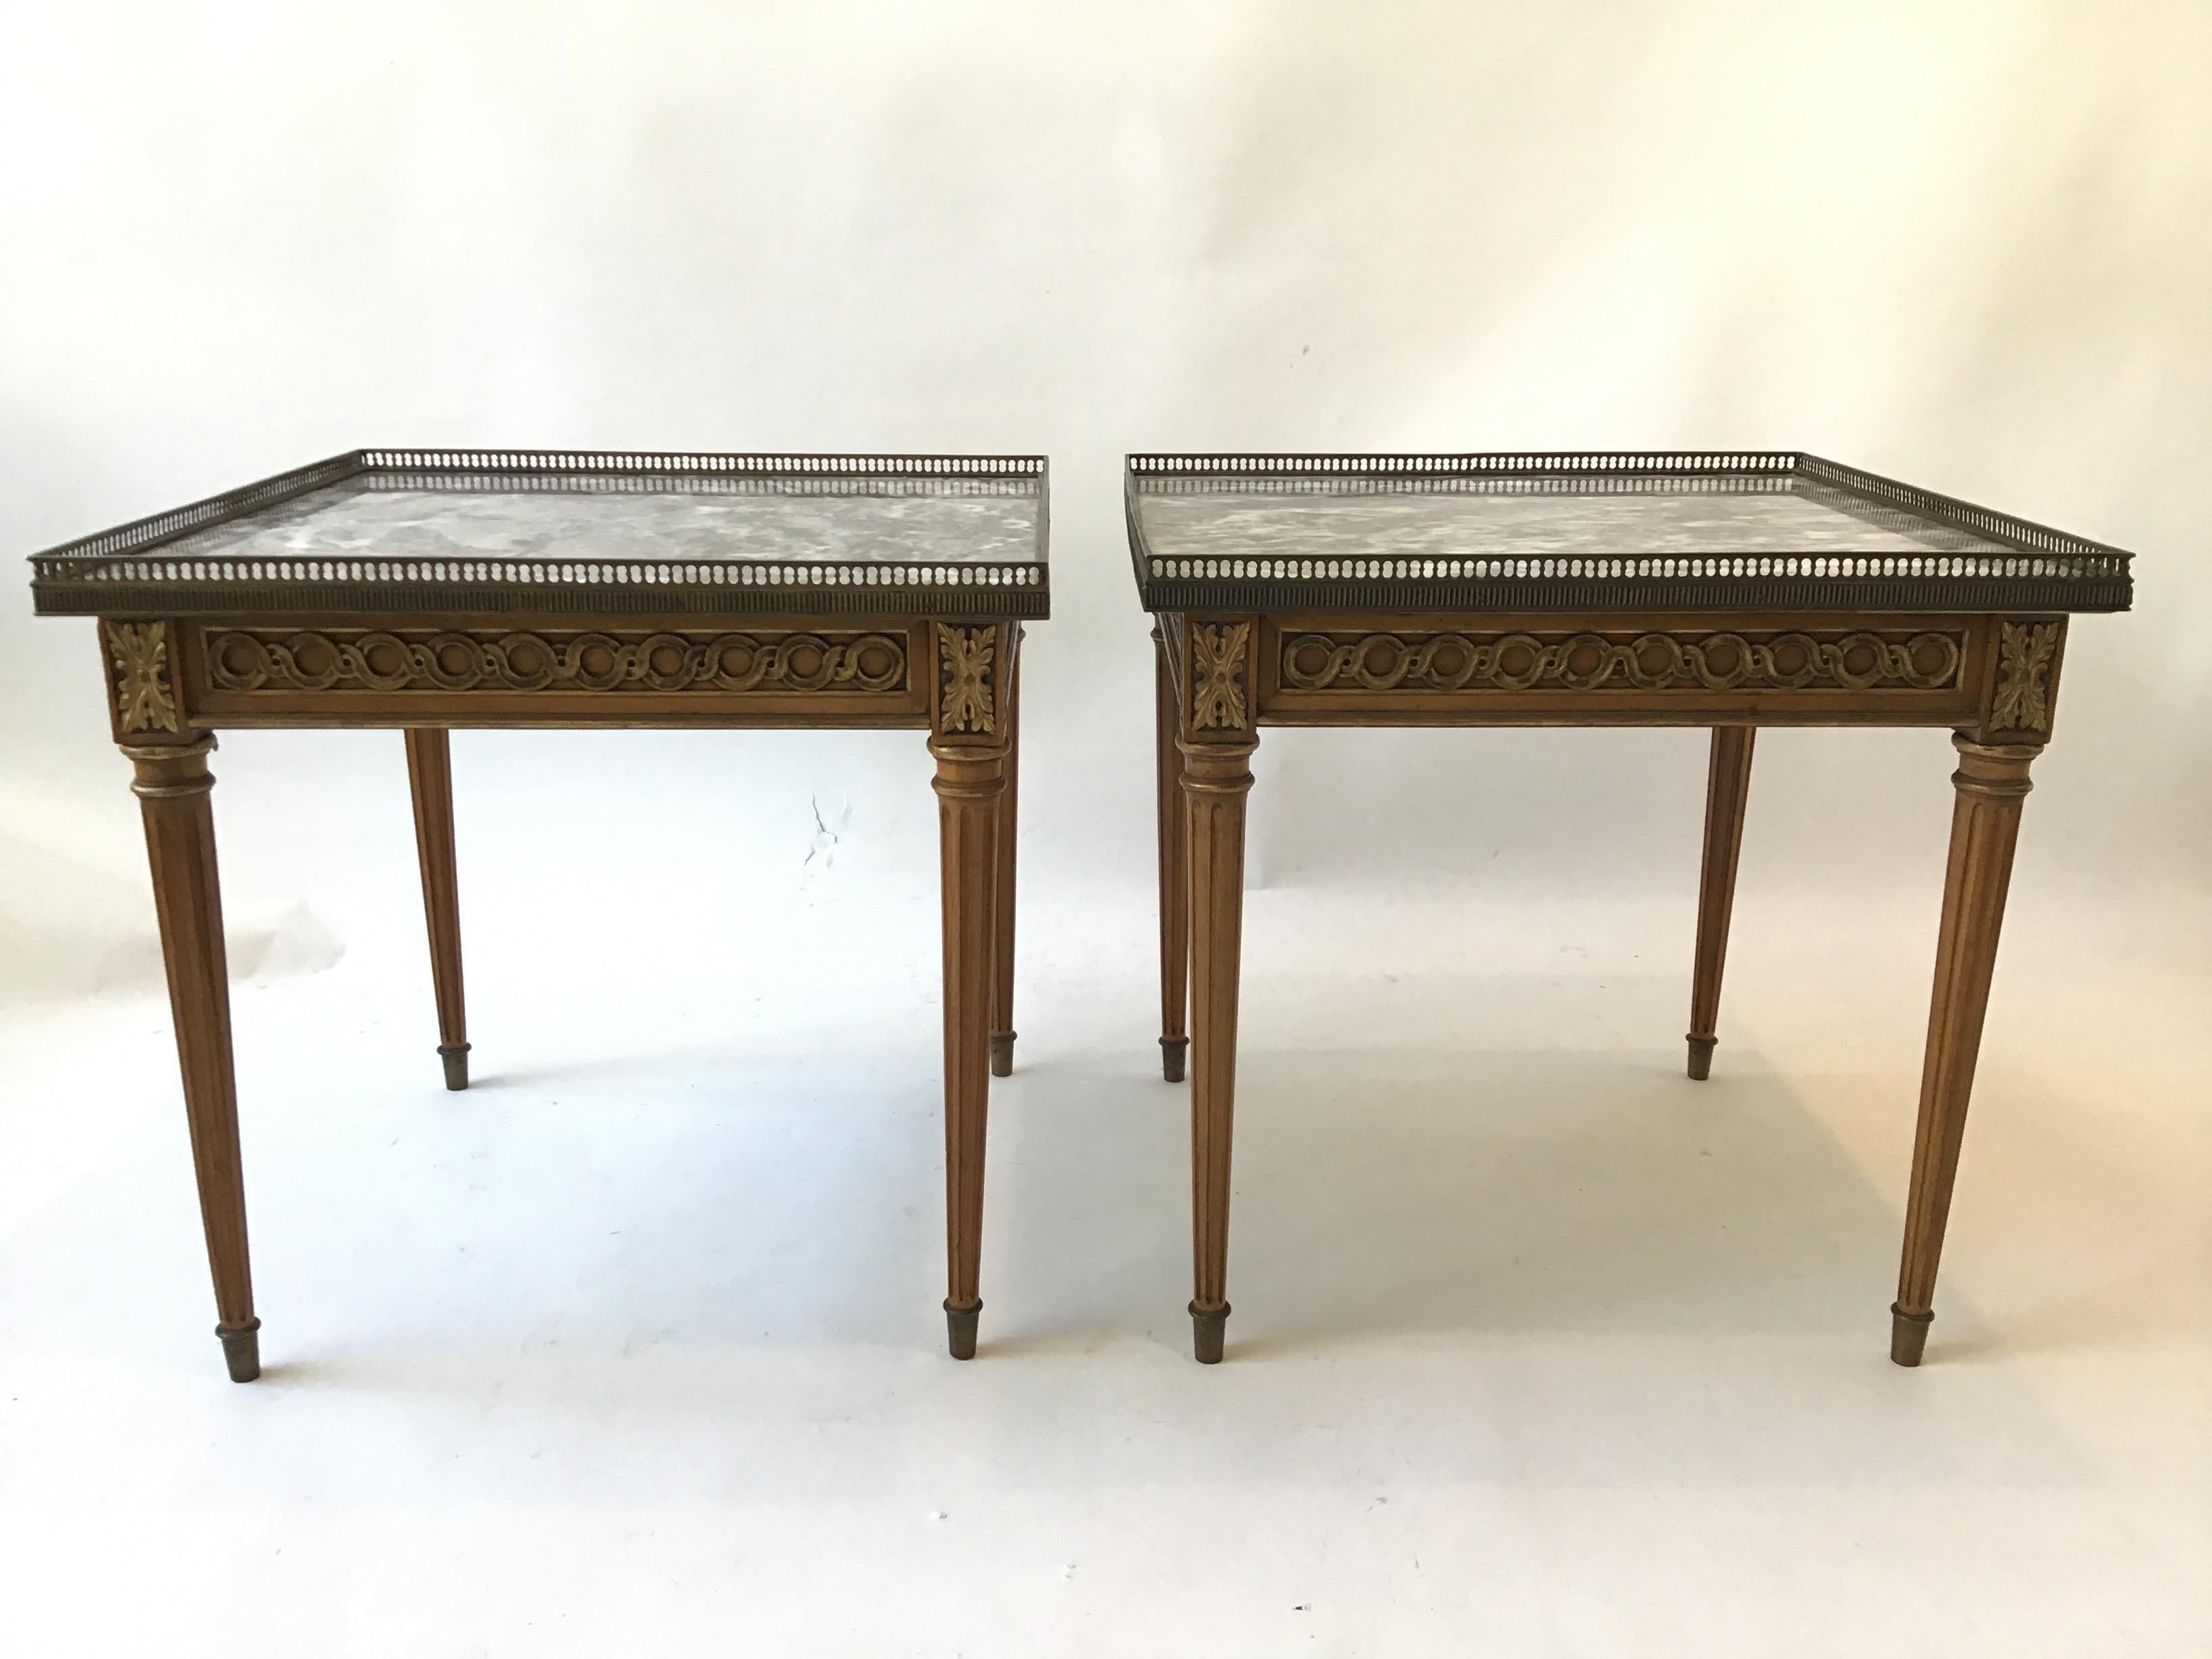 Pair of 1960s French style Louis XVI marble-top side tables. Brass gallery, wood base. Gilt accents. Tops are not attached.
These tables can be delivered in the New York tri state area.